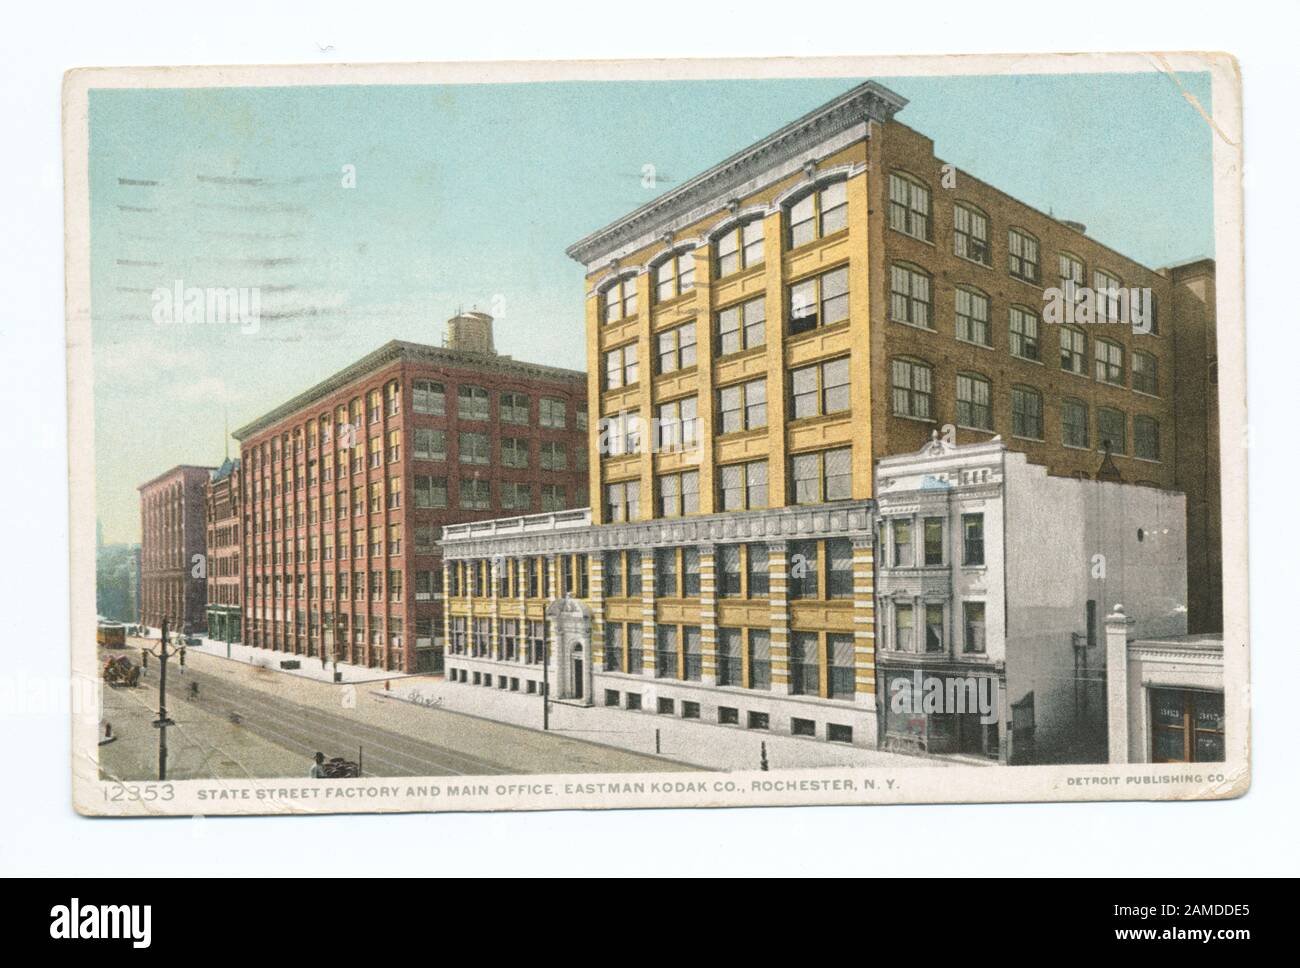 State St Factory and Main Office, Eastman Kodak Co, Rochester, N Y  Postcard series number: 12353 1908-1909.; State St. Factory and Main Office, Eastman Kodak Co., Rochester, N. Y. Stock Photo